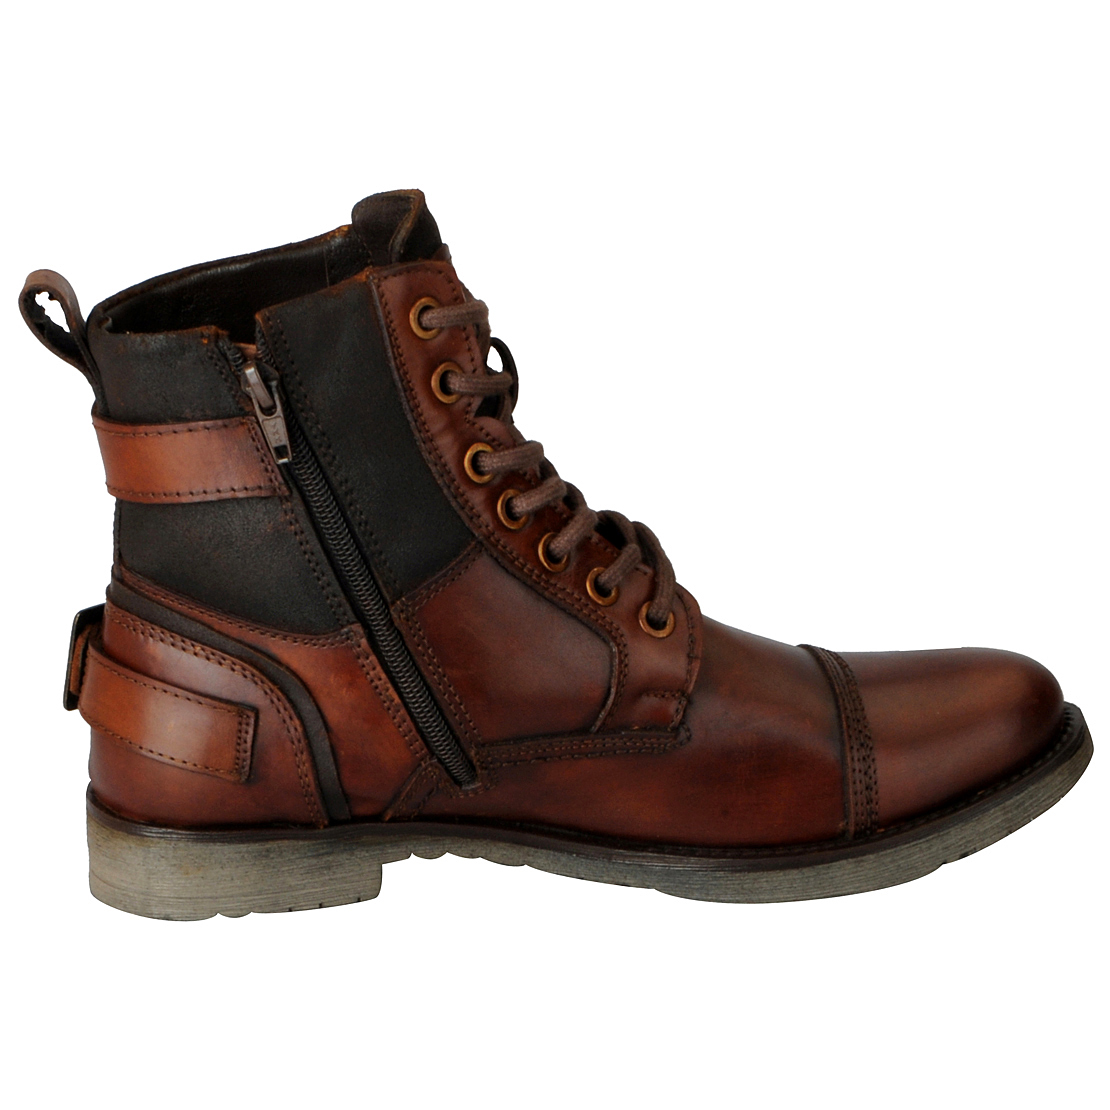 Buy Fausto Men's Tan High Ankle Leather Boots Online @ ₹2639 from ShopClues